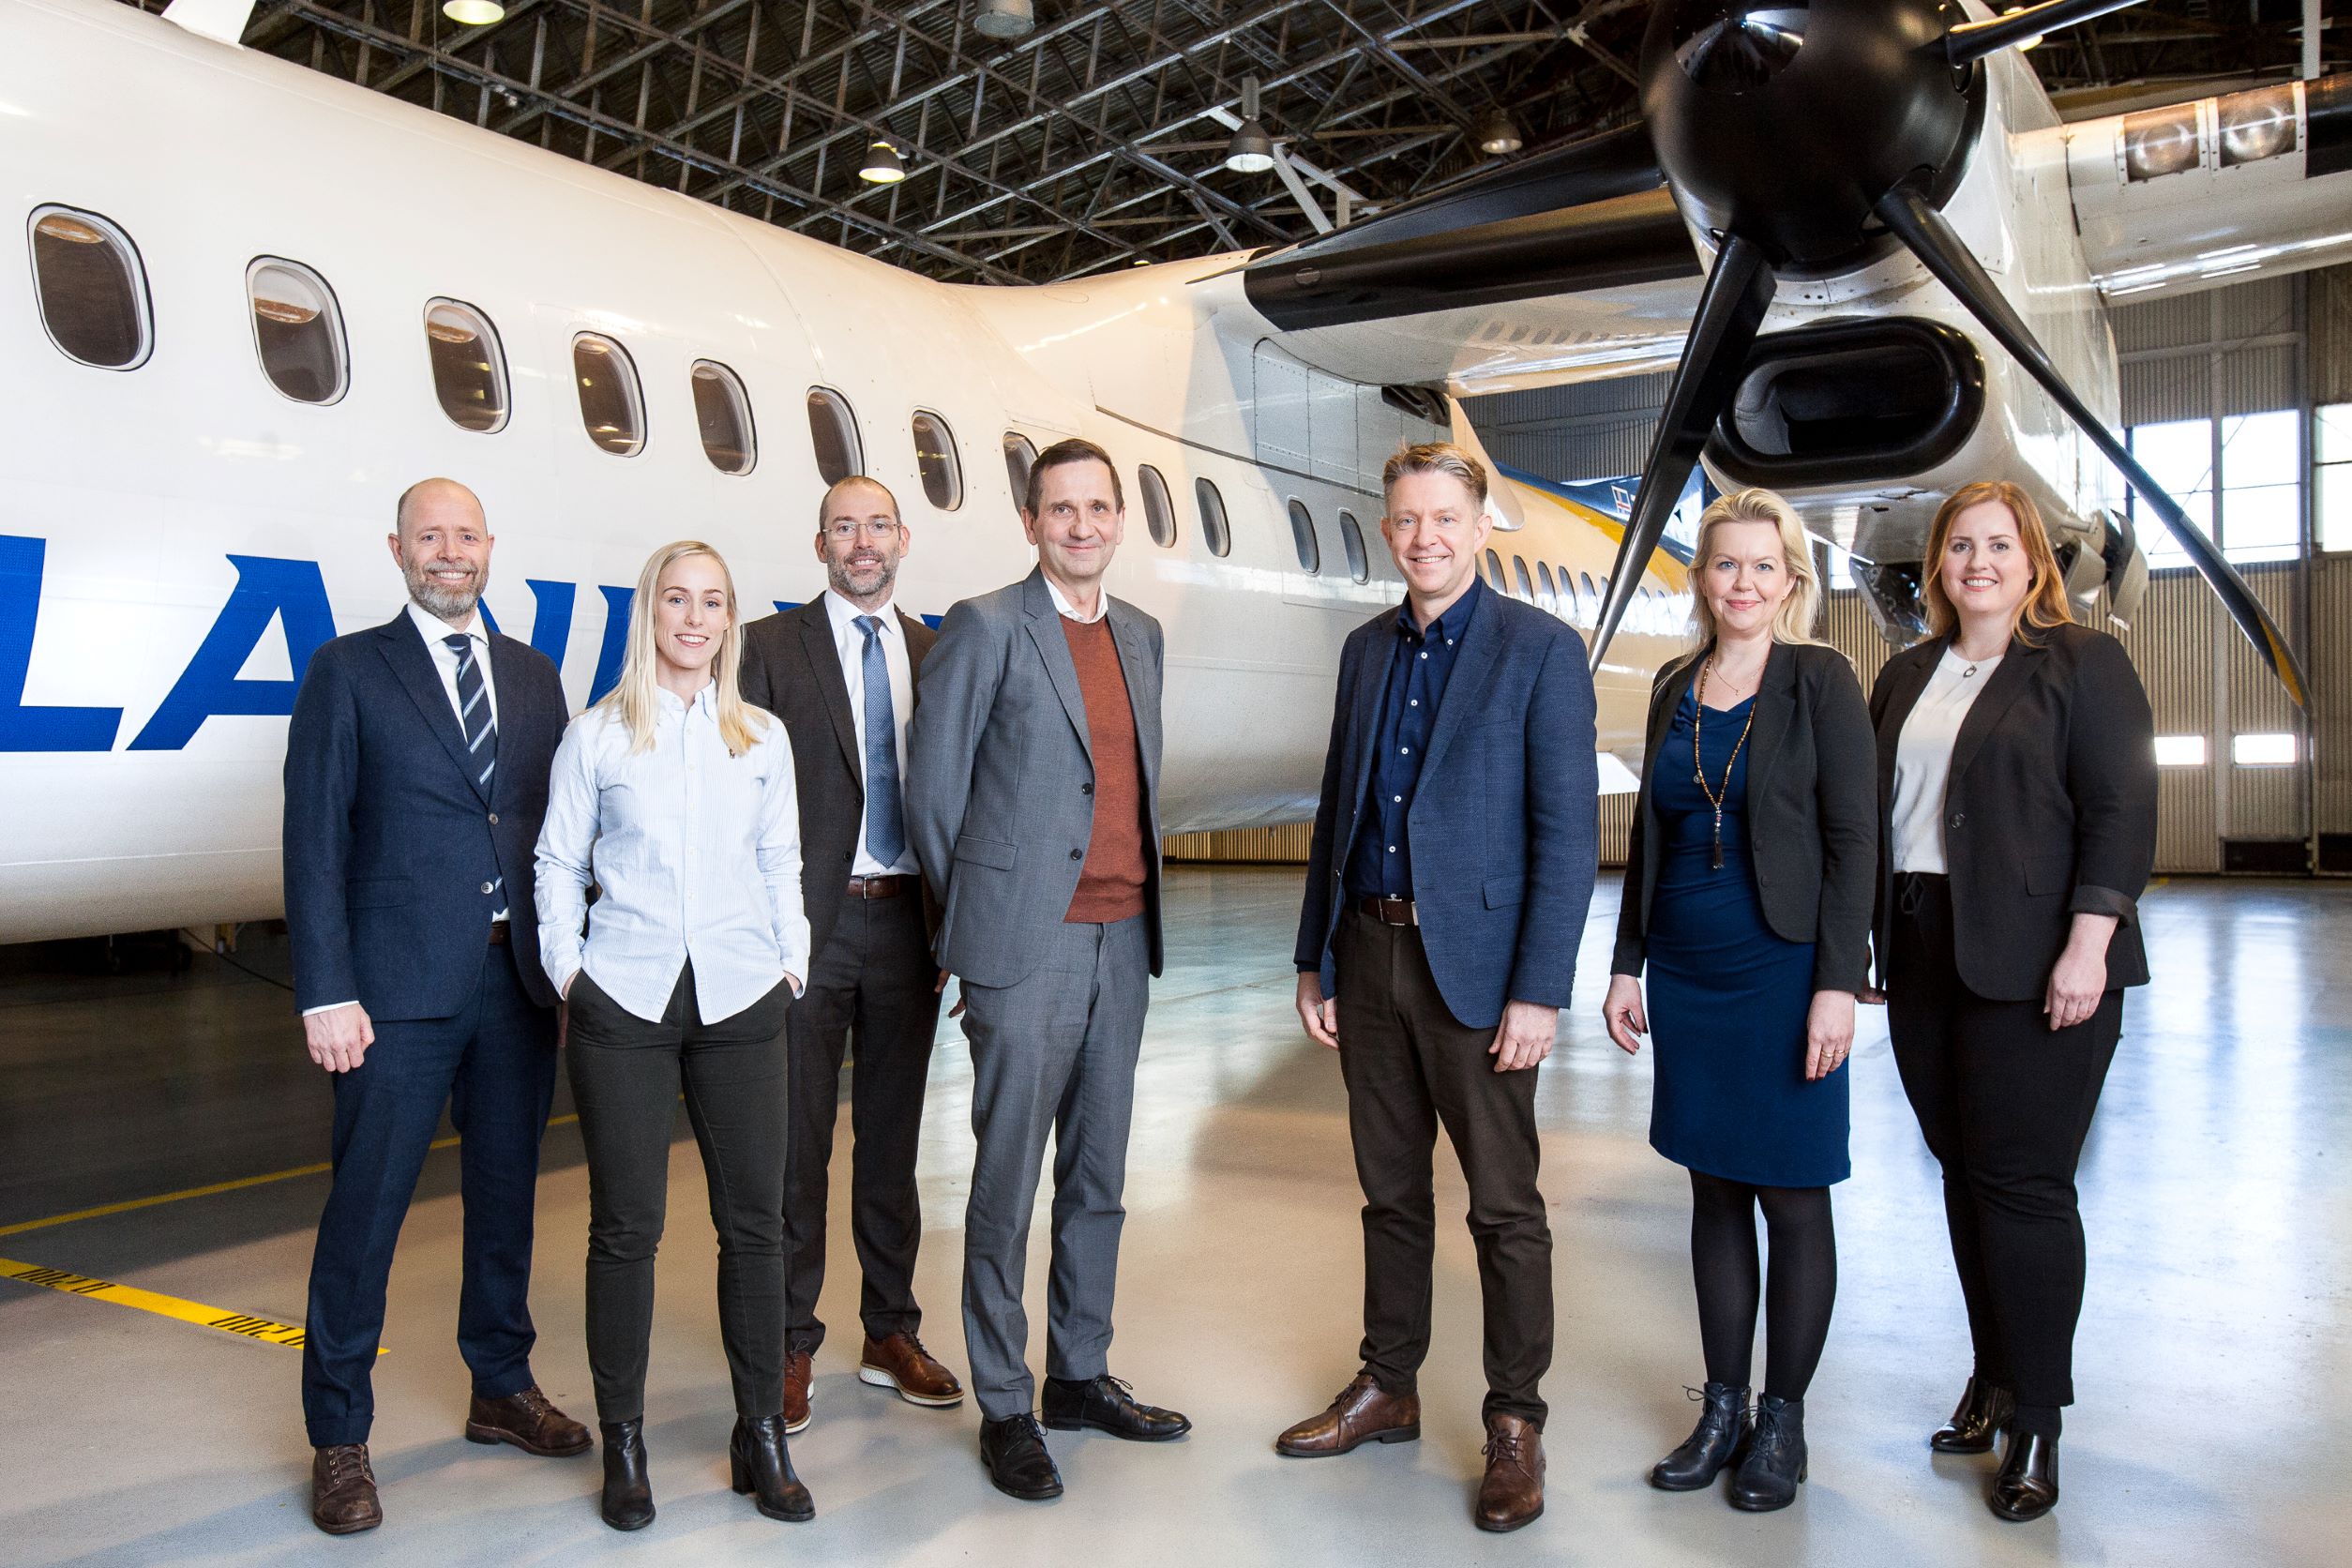 Representatives of management from Icelandair and Landsvirkjun stand in front of a plane in a hangar